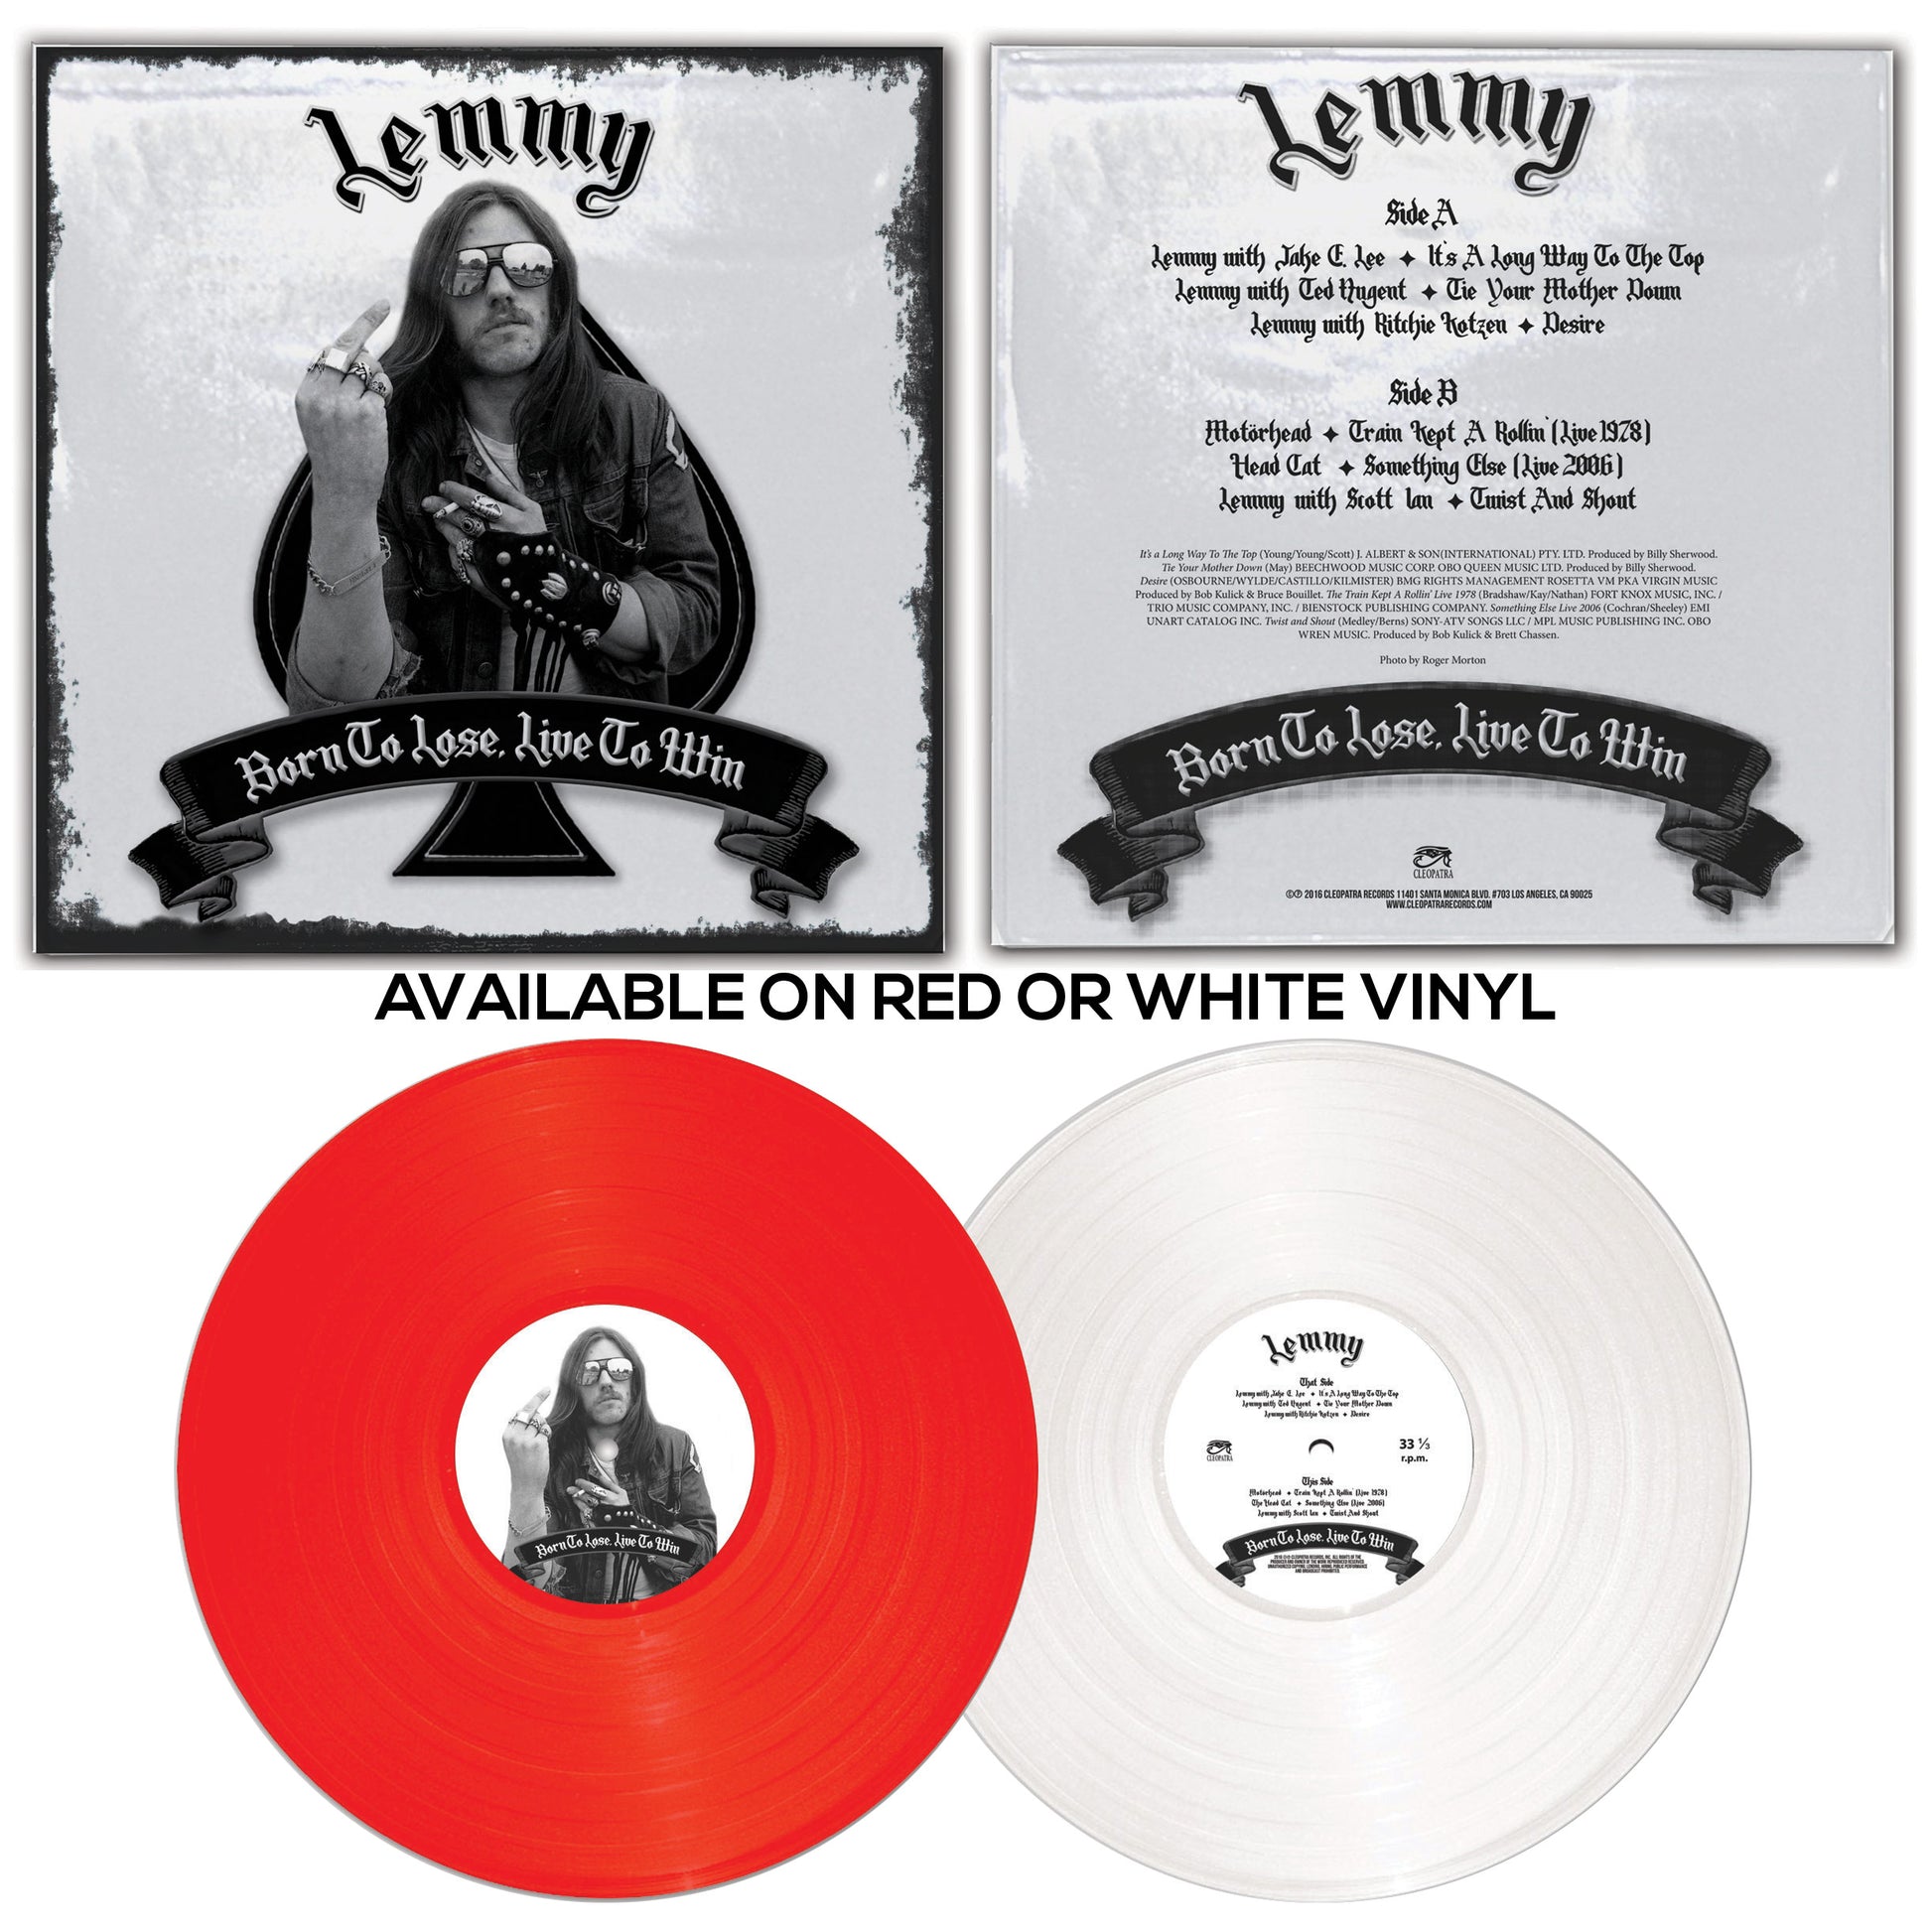 Lemmy - Born To Lose, Live To Win (Limited Edition Color LP)